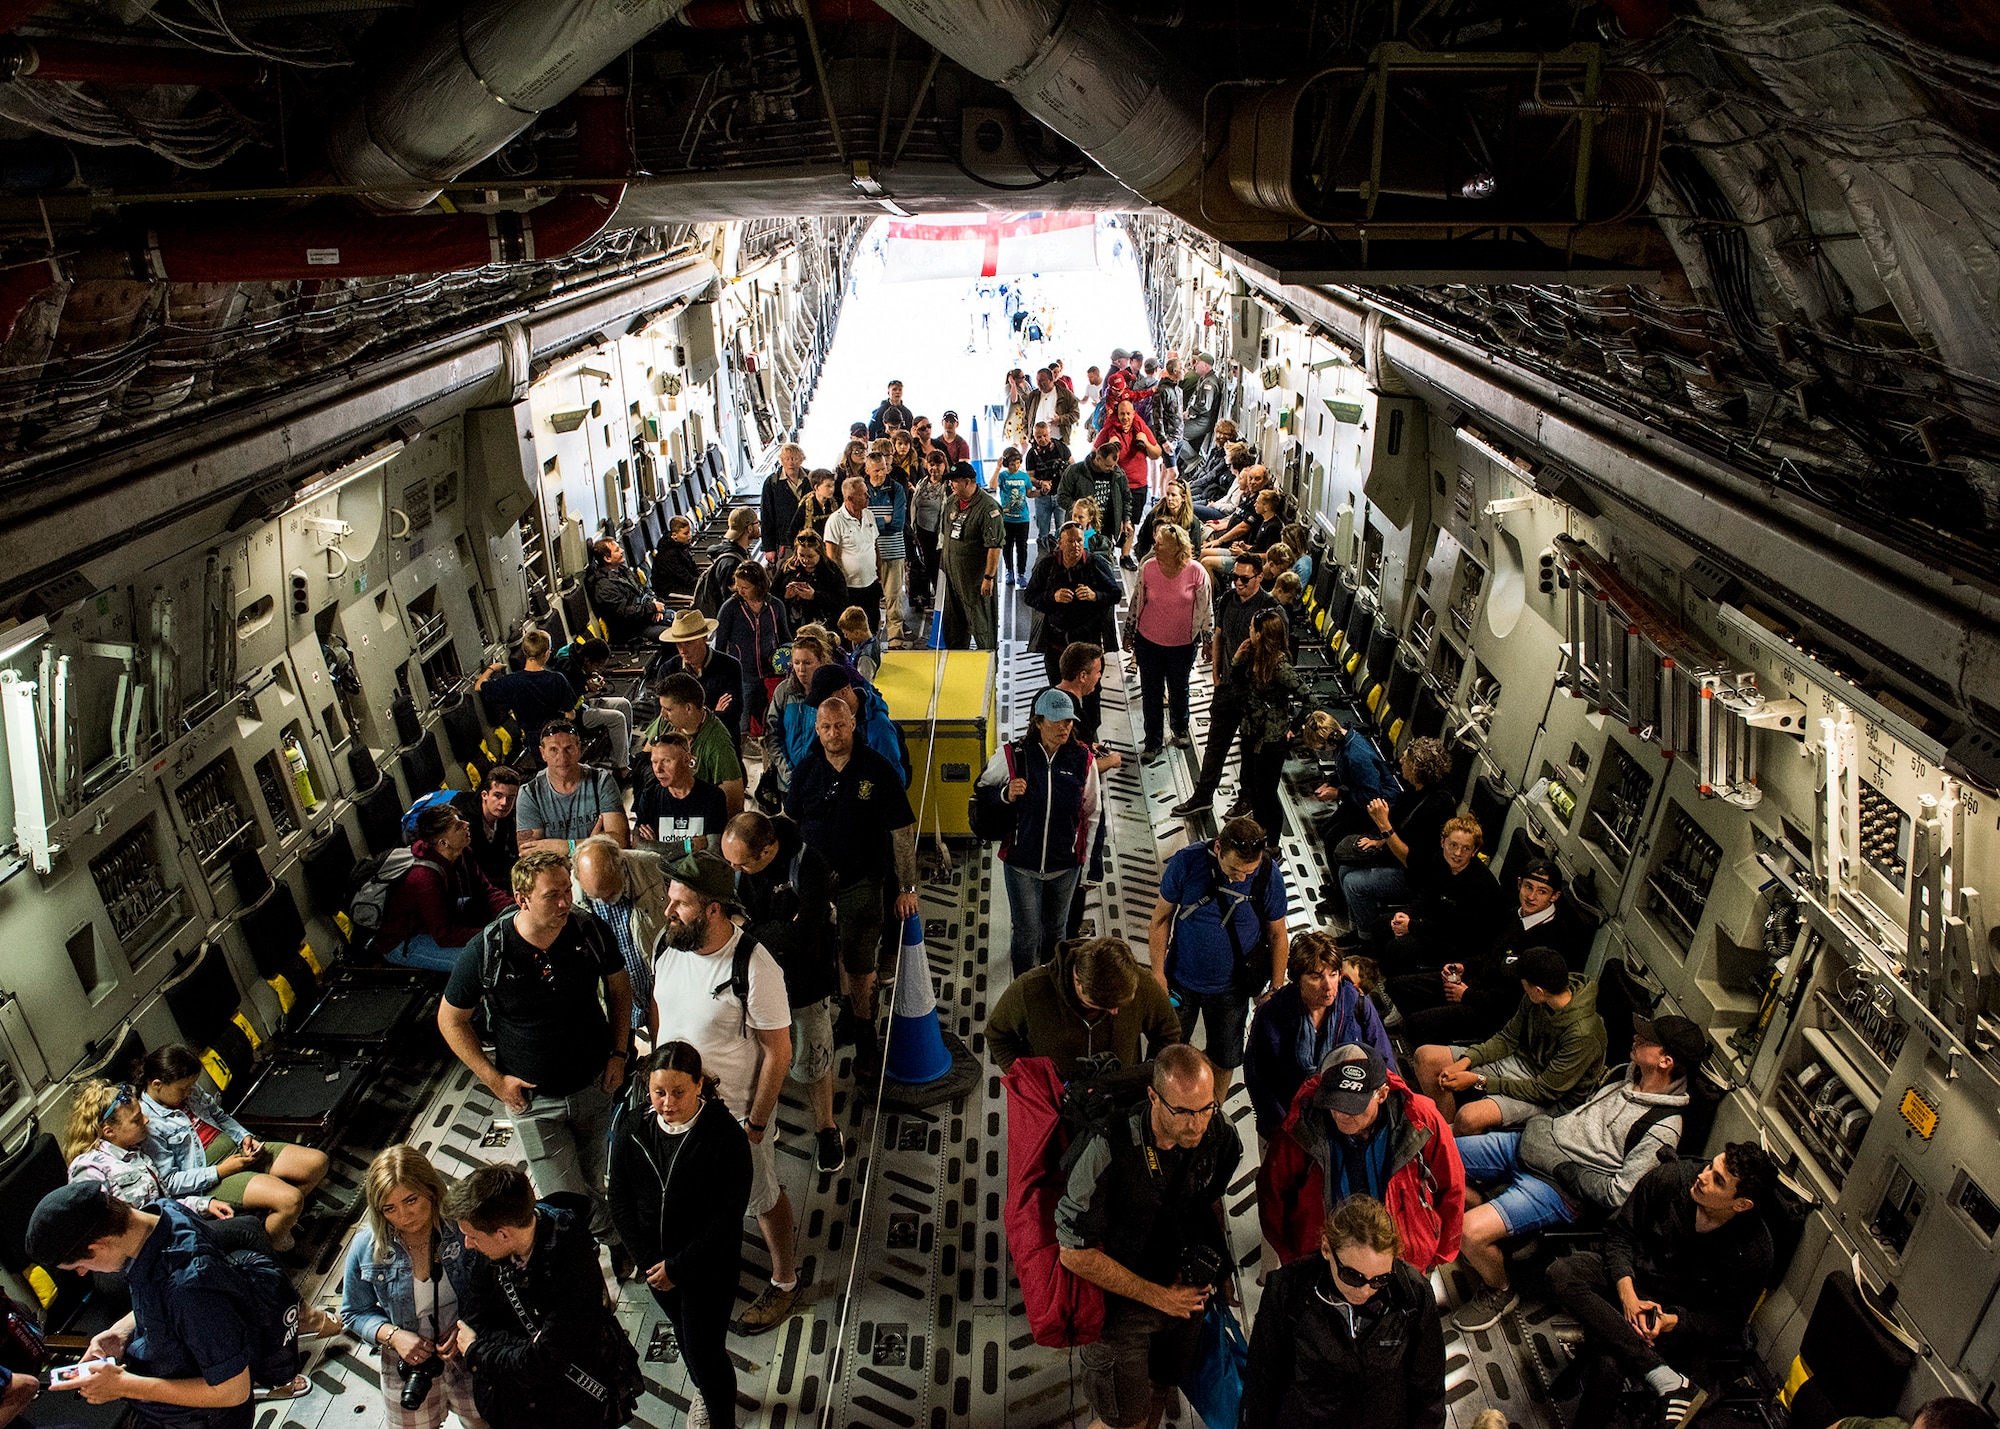 U.S. Air Force service members from the 315th Airlift Wing host tours for the public inside a C-17 Globemaster III on static display from Charleston Air Force Base, South Carolina, during the 2019 Royal International Air Tattoo at RAF Fairford, England, July 20, 2019. This year's RIAT commemorated the 70th anniversary of NATO and highlighted the United States' enduring commitment to its European allies. (U.S. Air Force photo by Airman 1st Class Jennifer Zima)